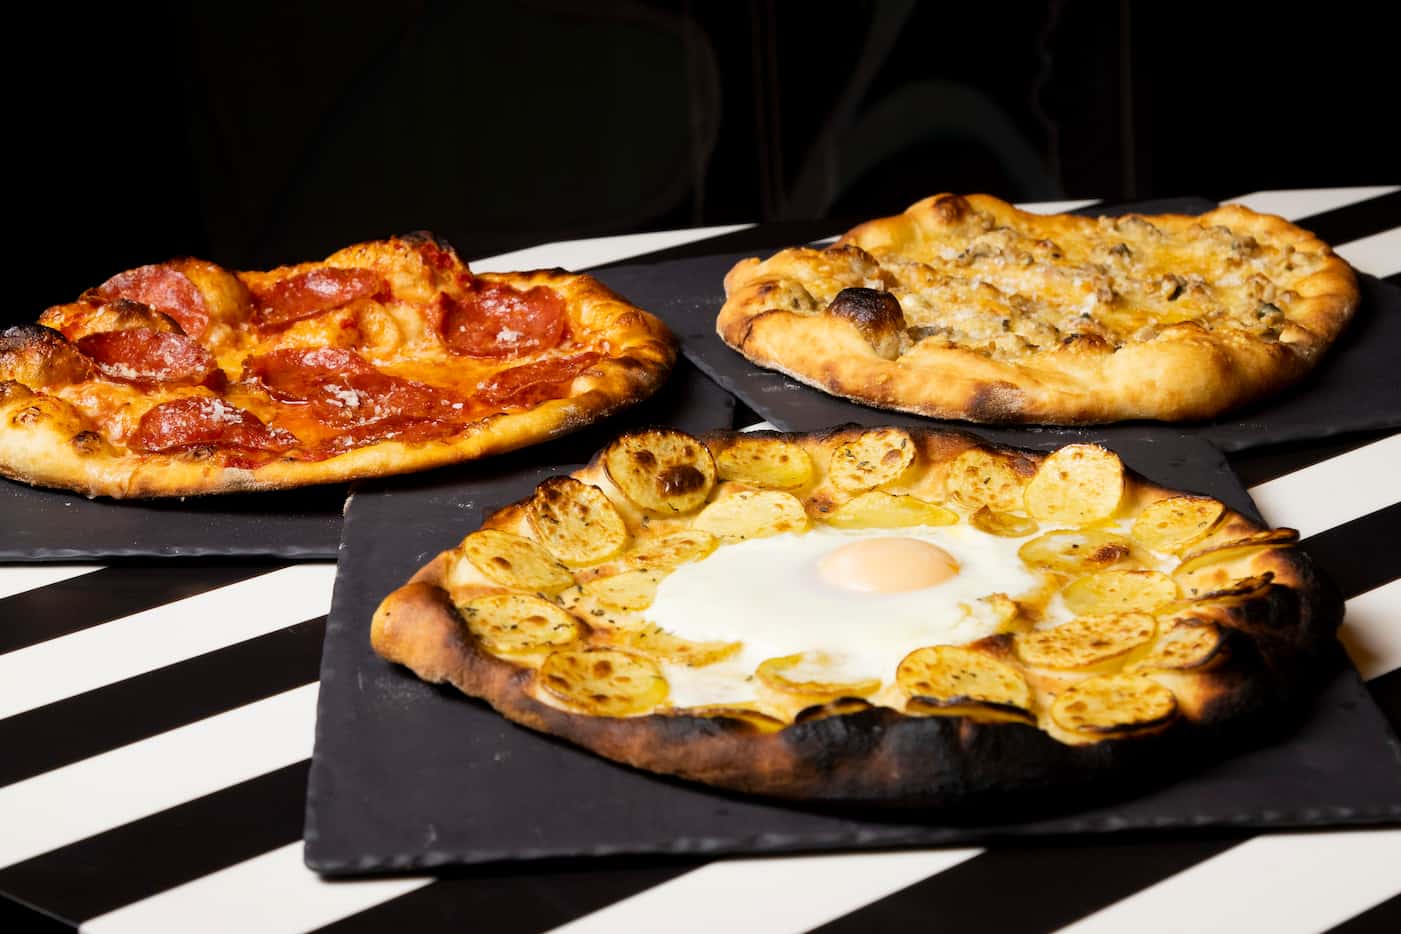 (From left) The pepperoni pizza, potato truffle and egg pizza, and white clam pizza...